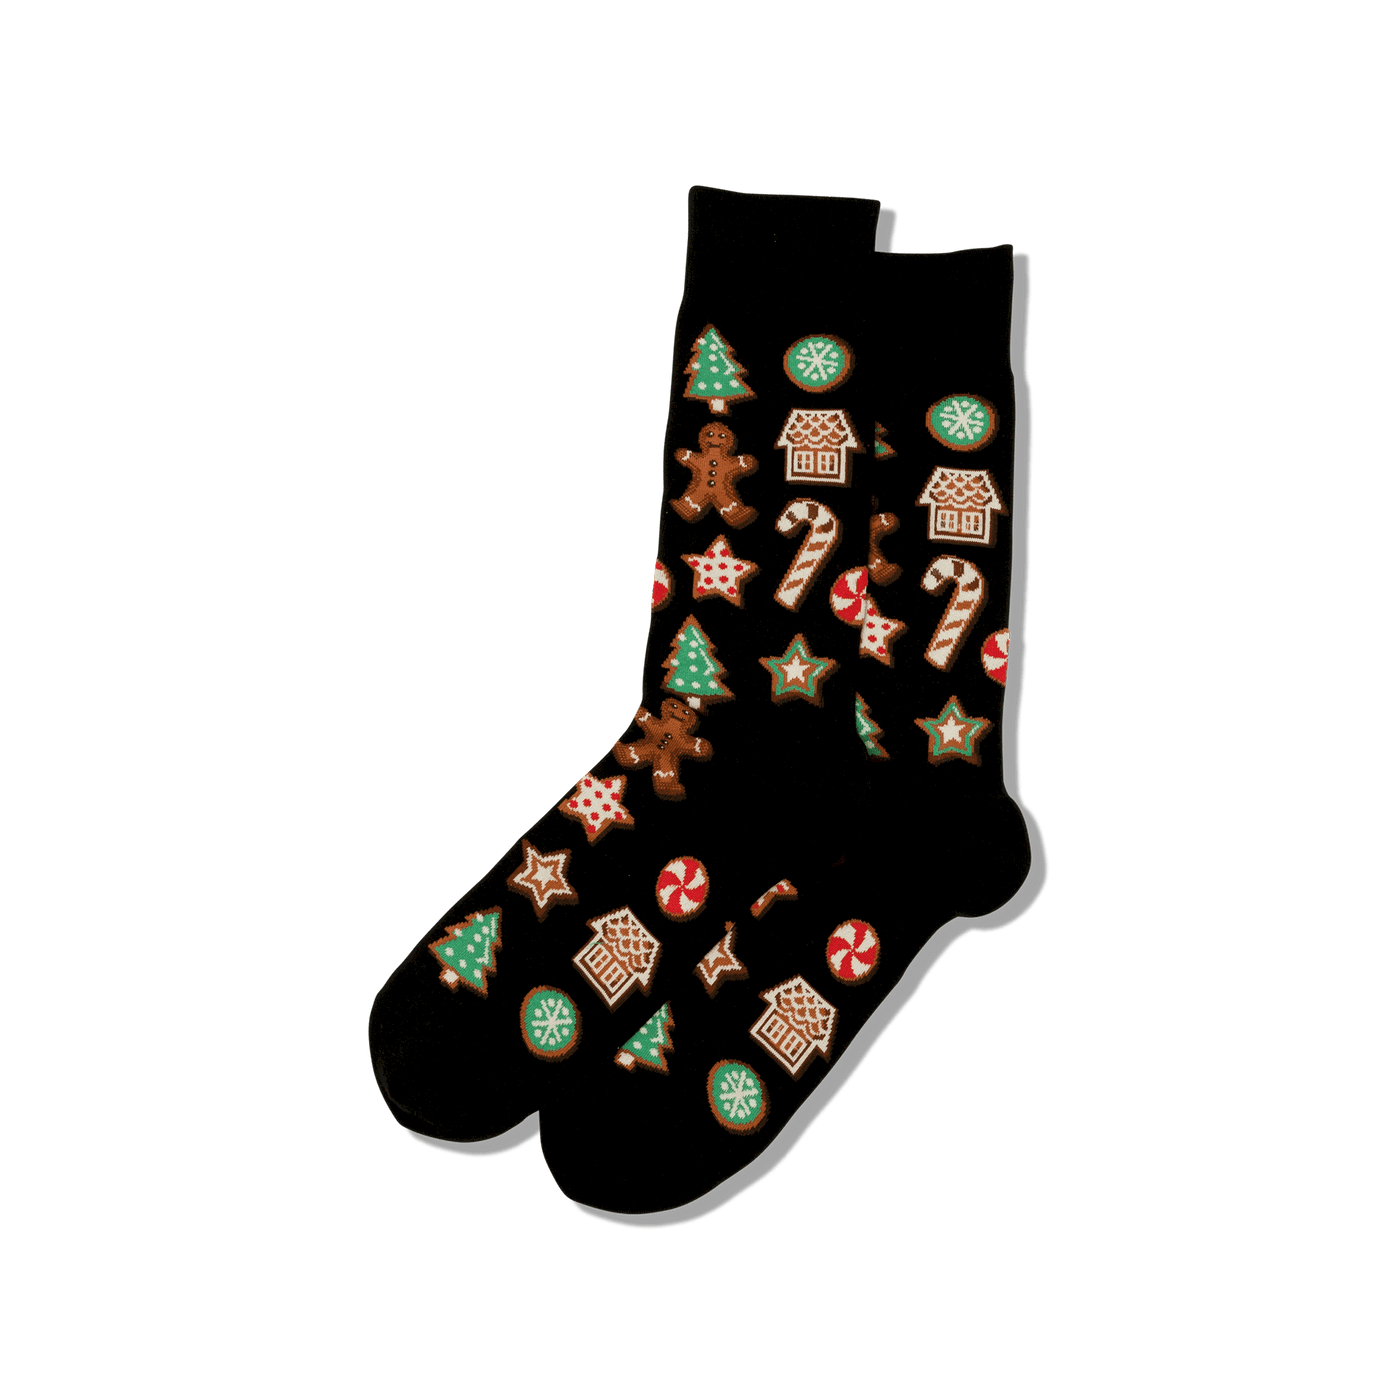 "Christmas Cookies" Crew Socks by Hot Sox - Large